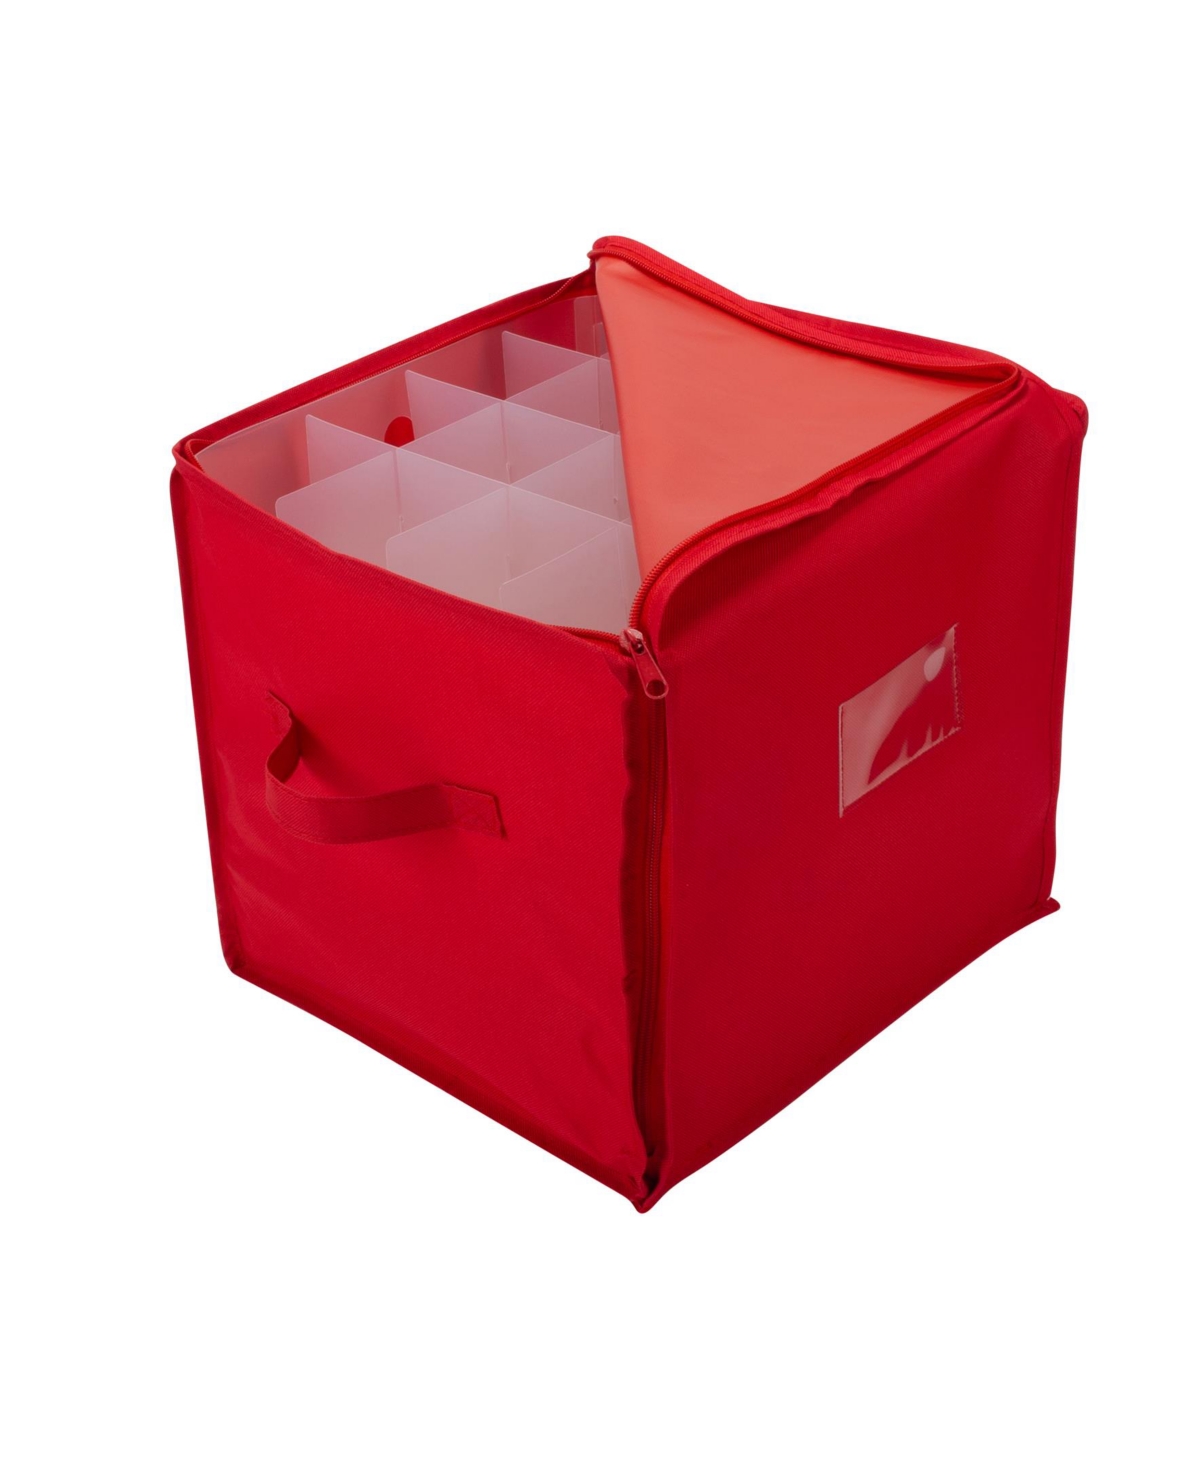 64 Count Stackable Christmas Ornament Storage Box - Red